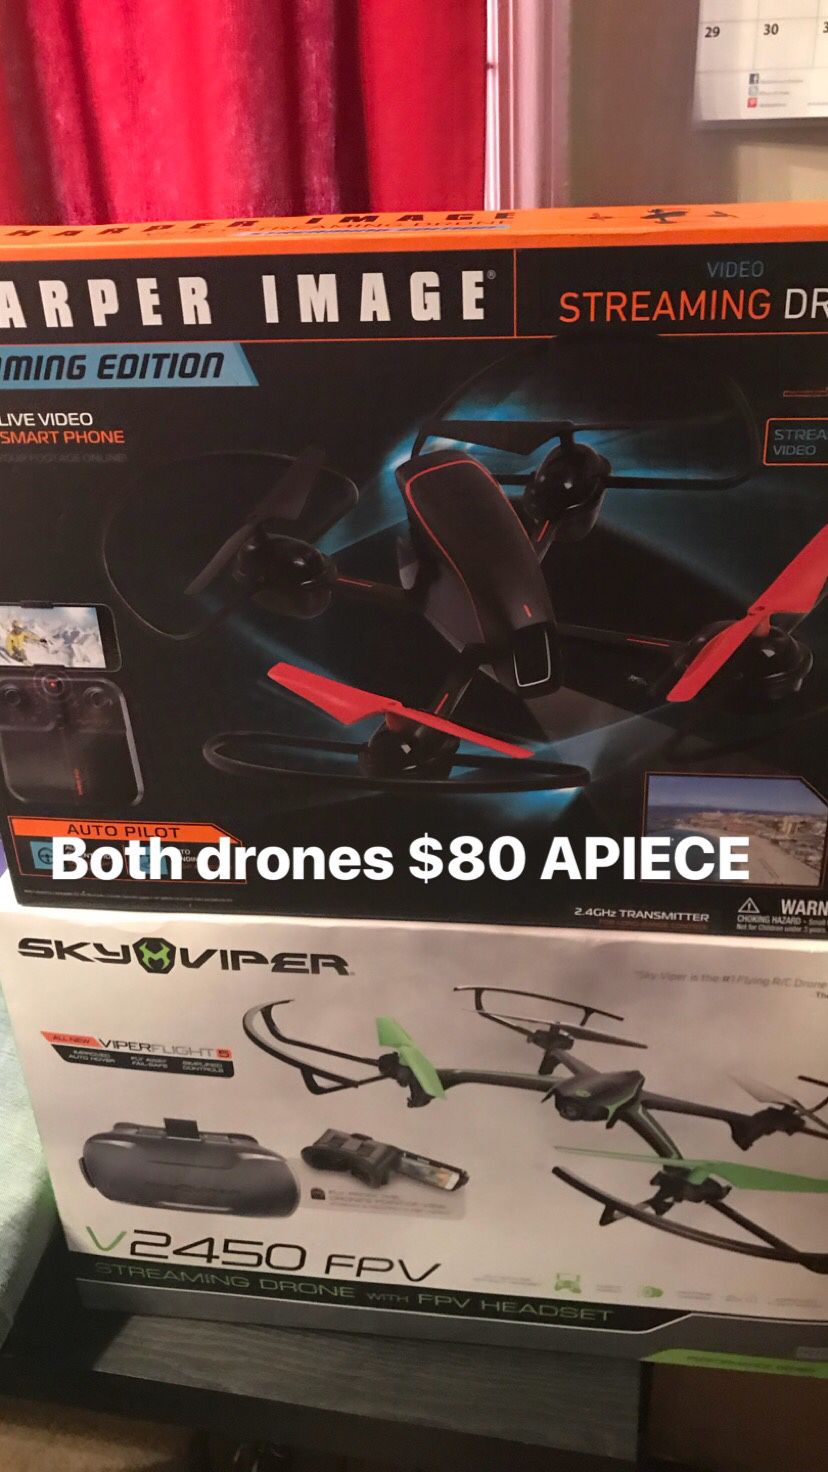 2 different type of drones